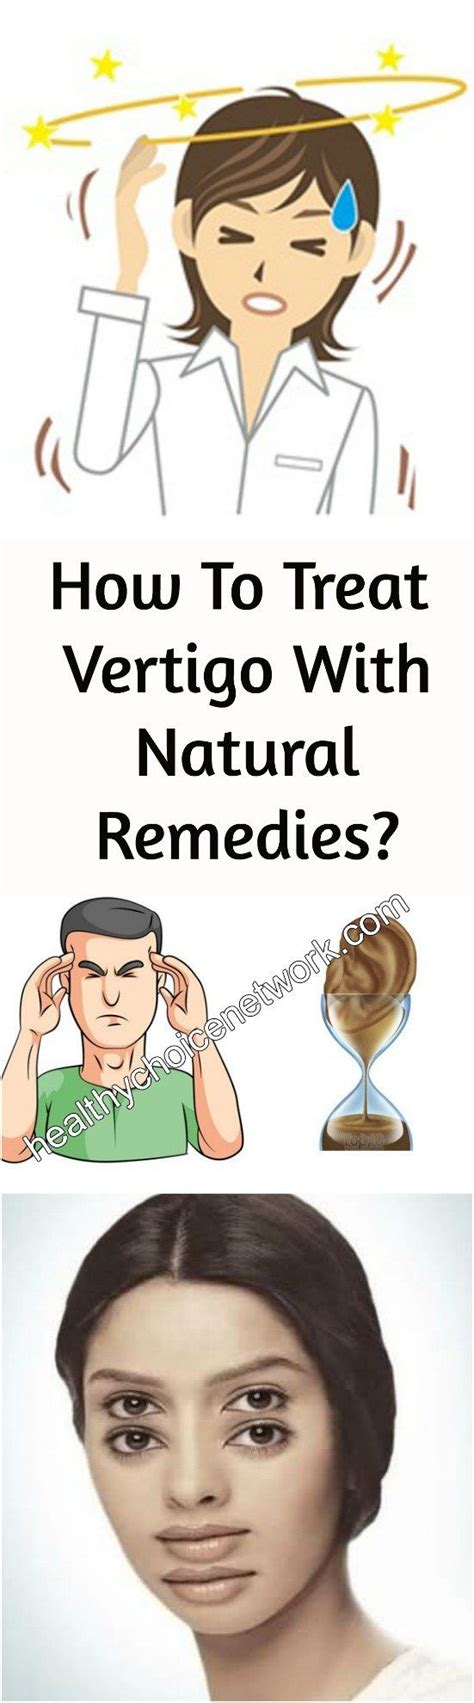 How To Treat Vertigo With Natural Remedies With Images